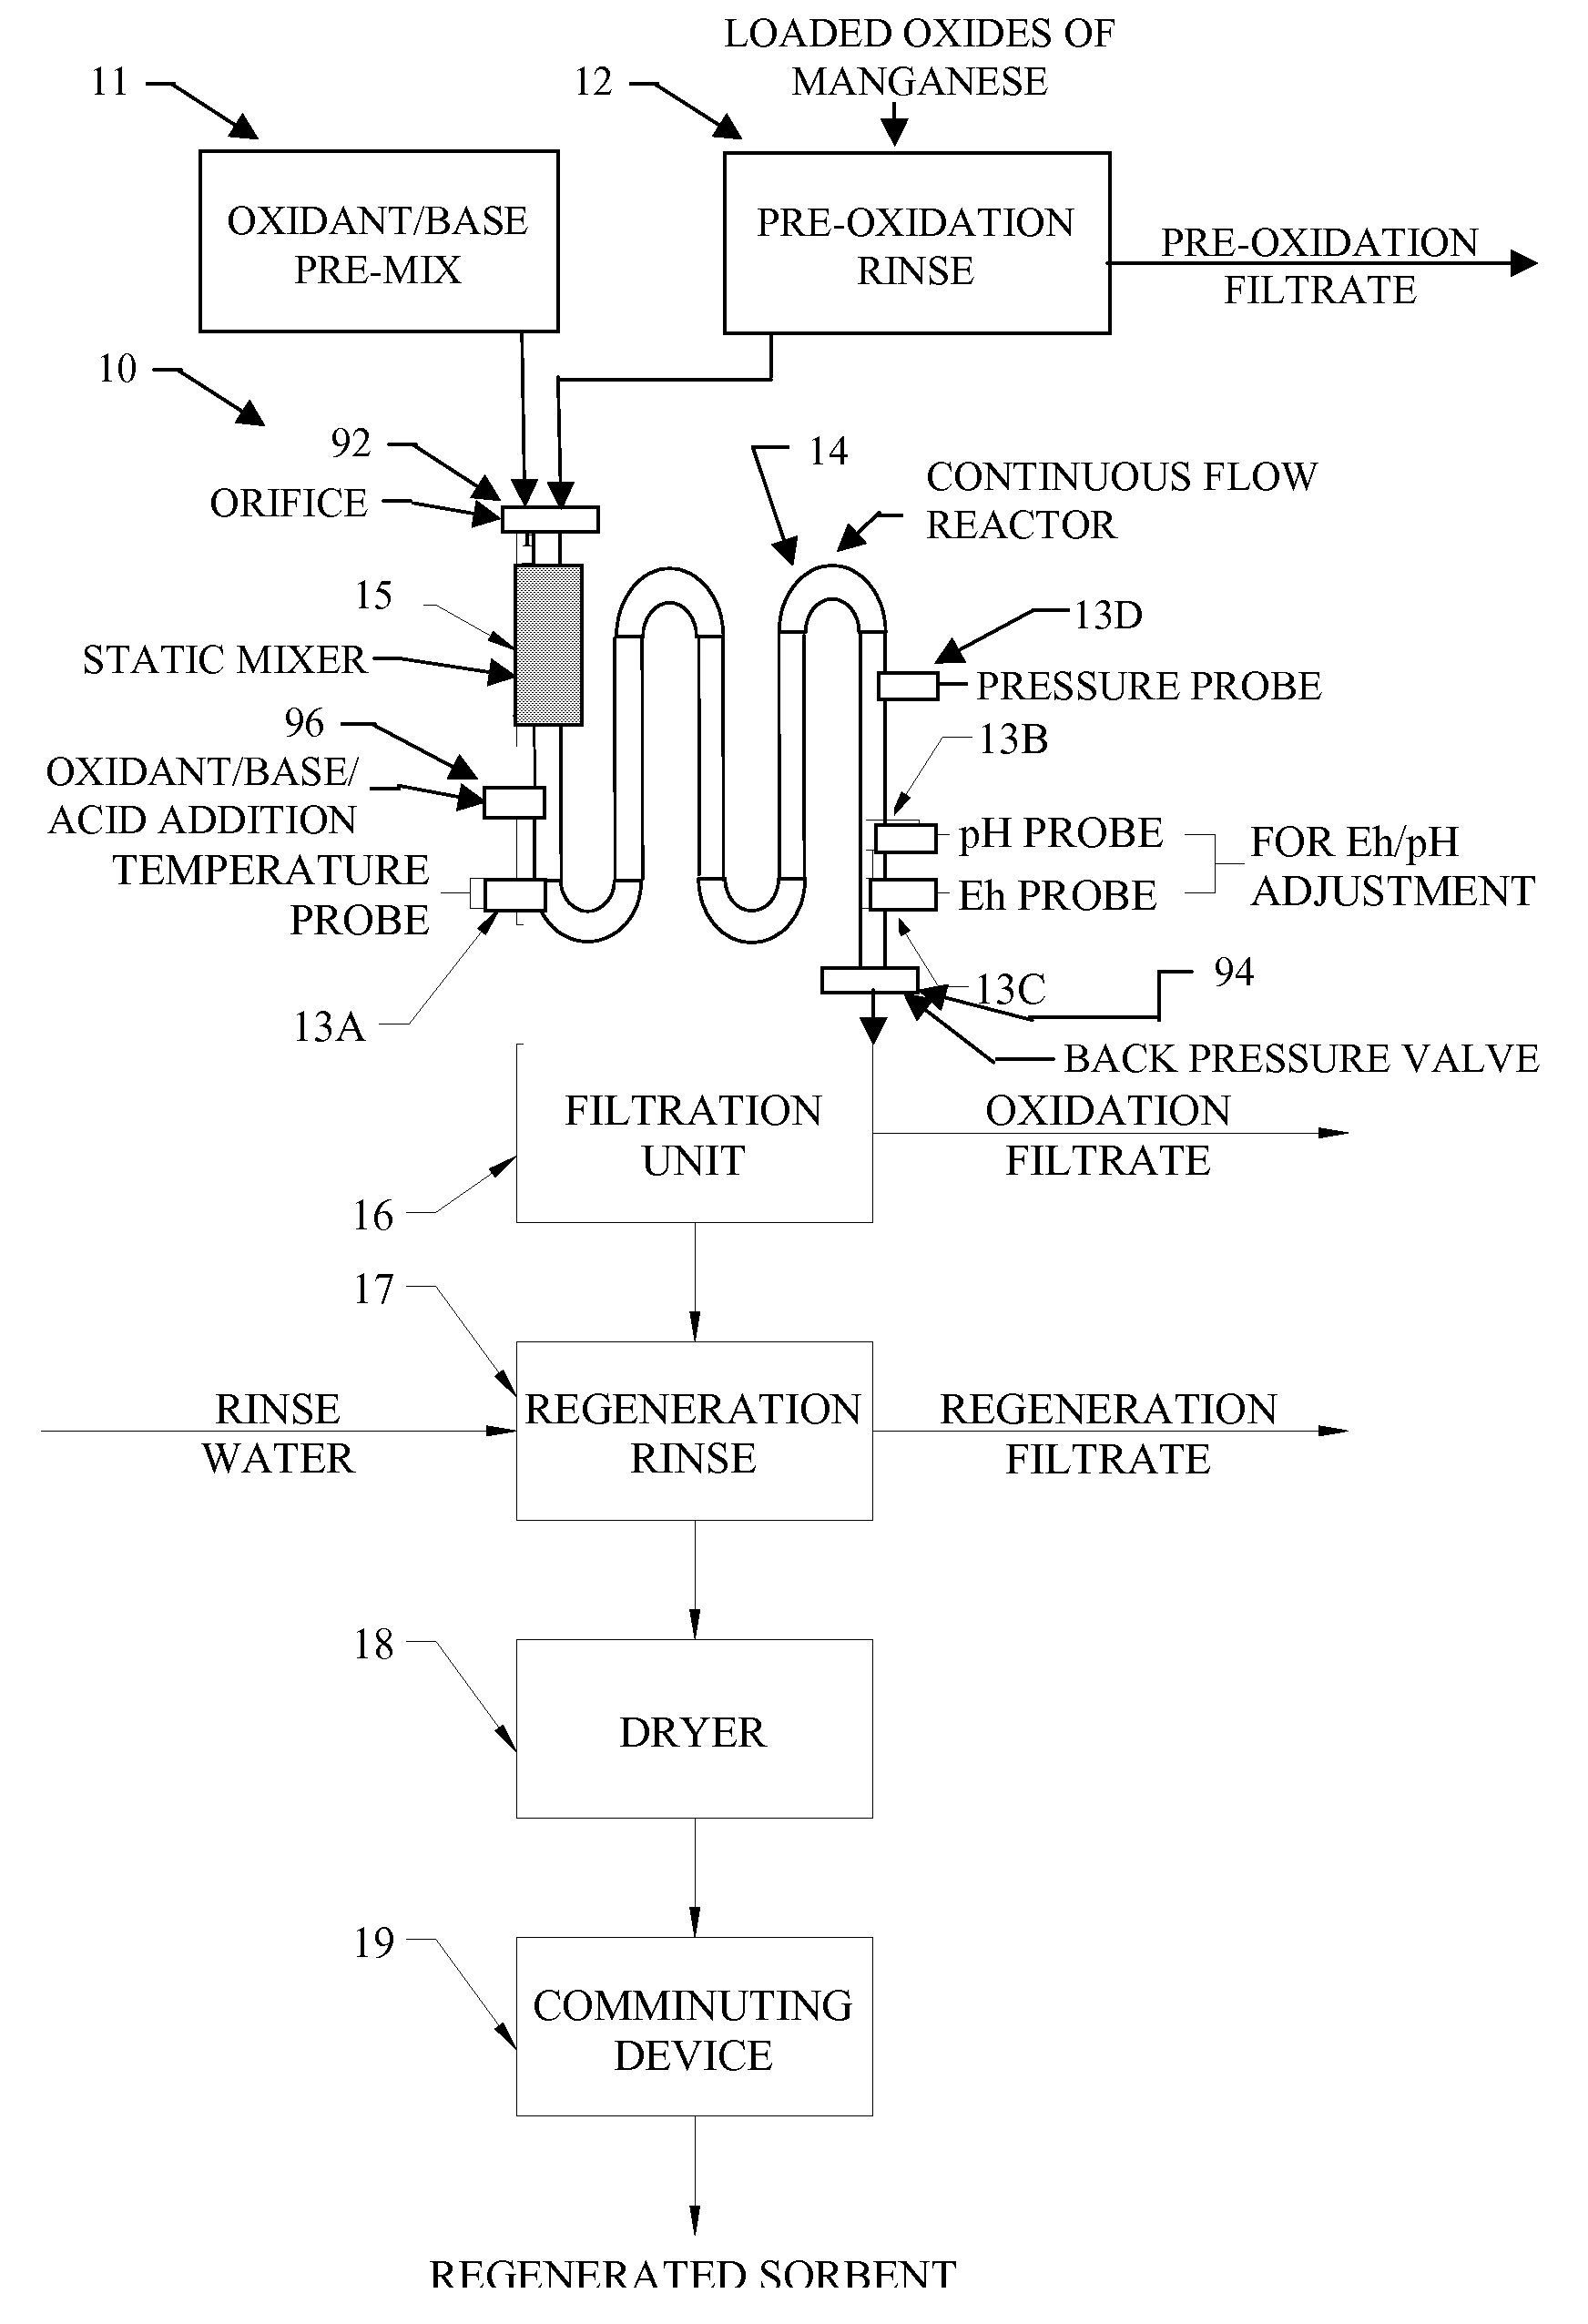 Oxides of Manganese Processed in Continuous Flow Reactors